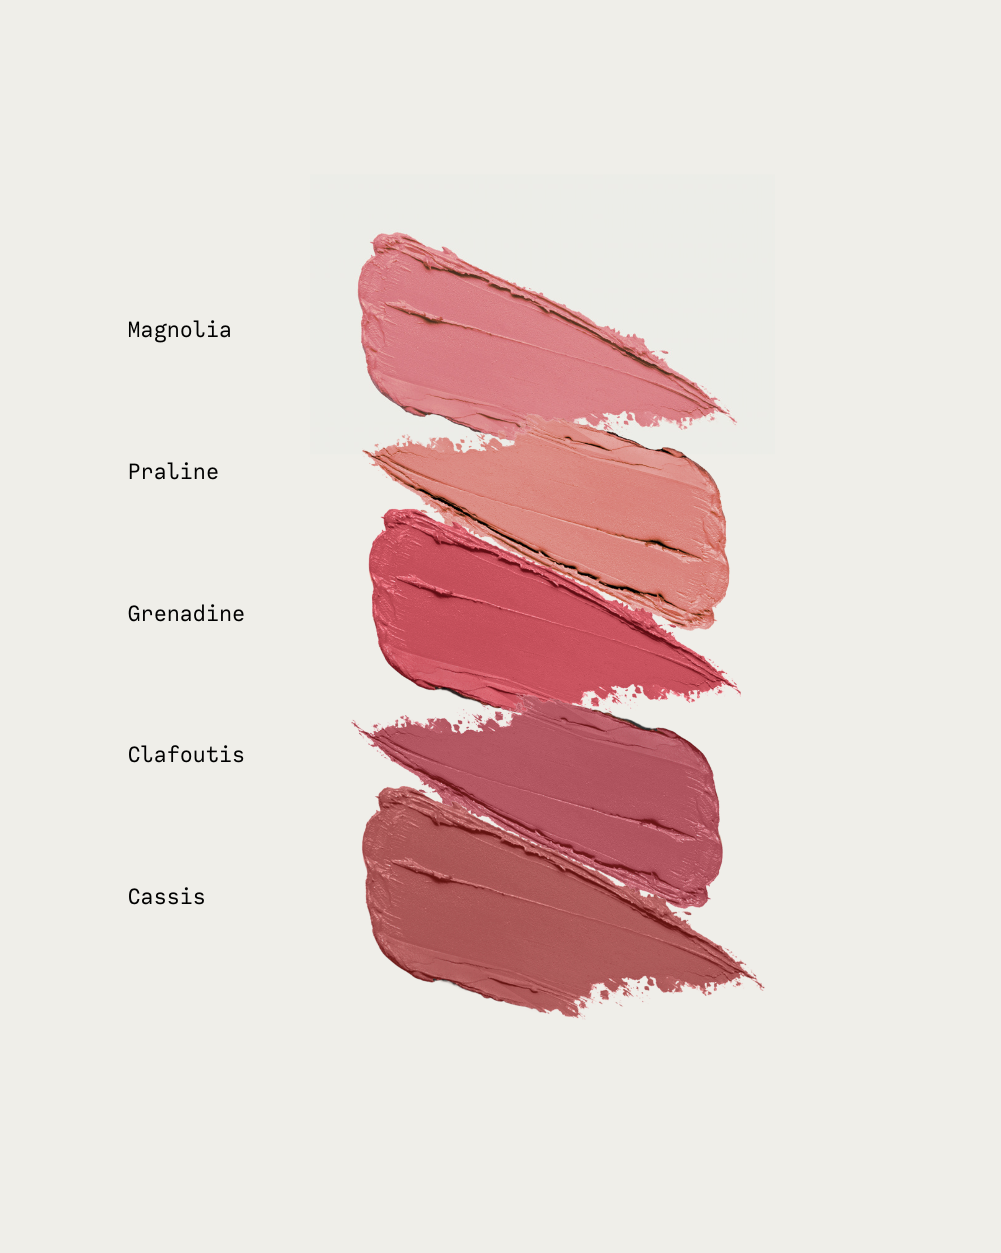 SWATCHES_12_65a7f4f2-2dc4-4681-a090-f6daabe289fc.png